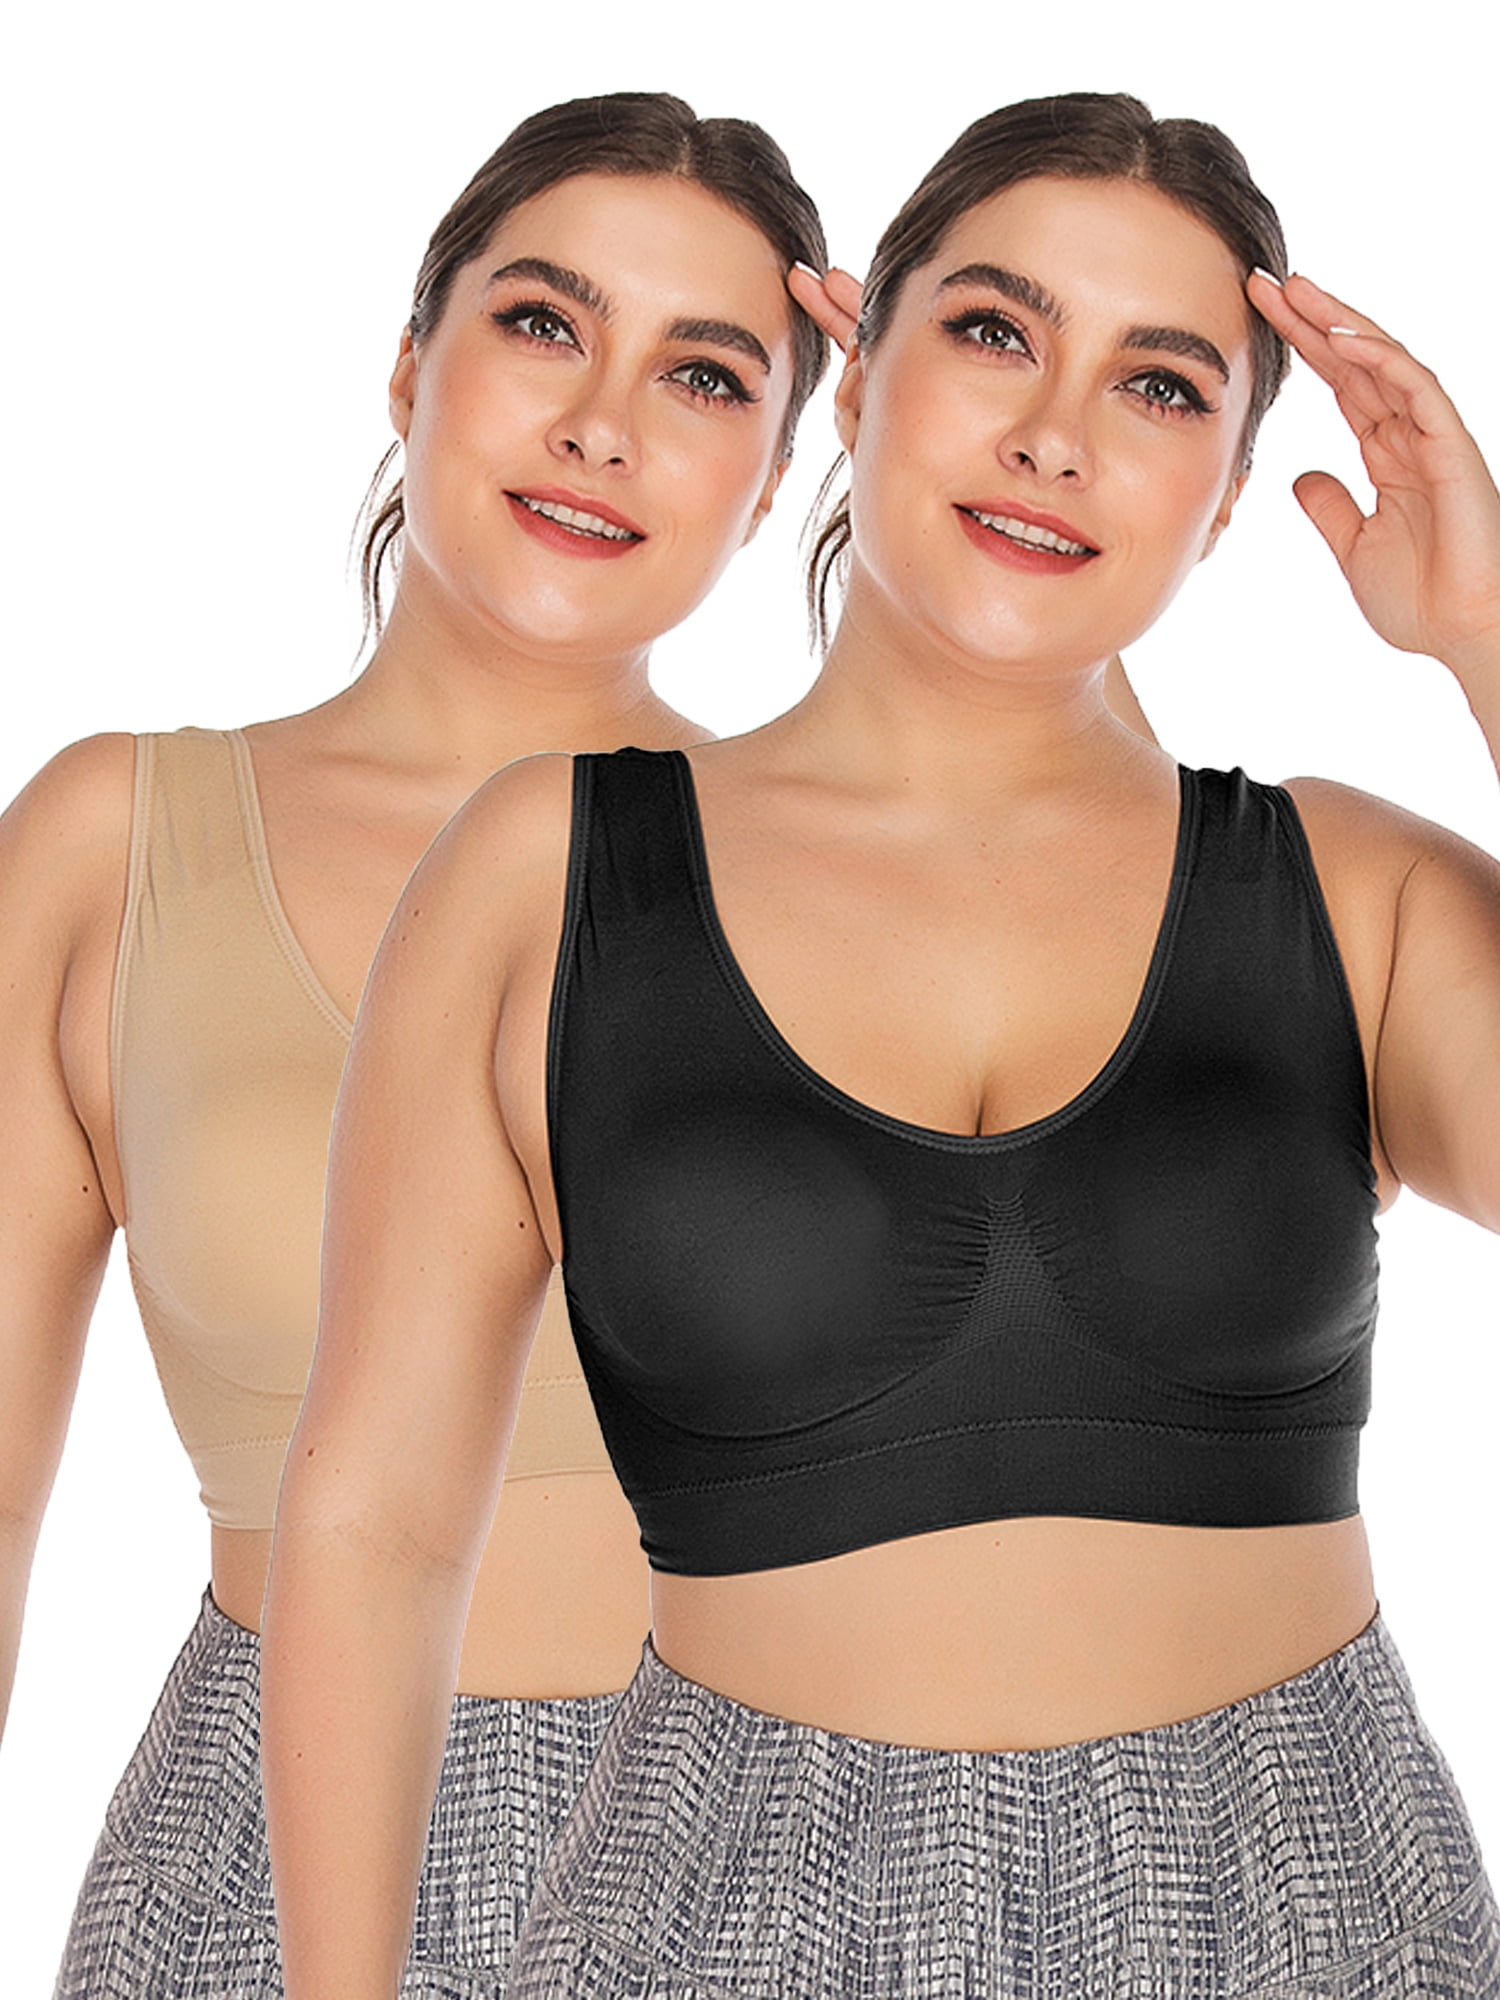 DODOING Plus Size Sports Bra Fashion Women's Supportive Wireless with  Removable Pads Yoga Bra 